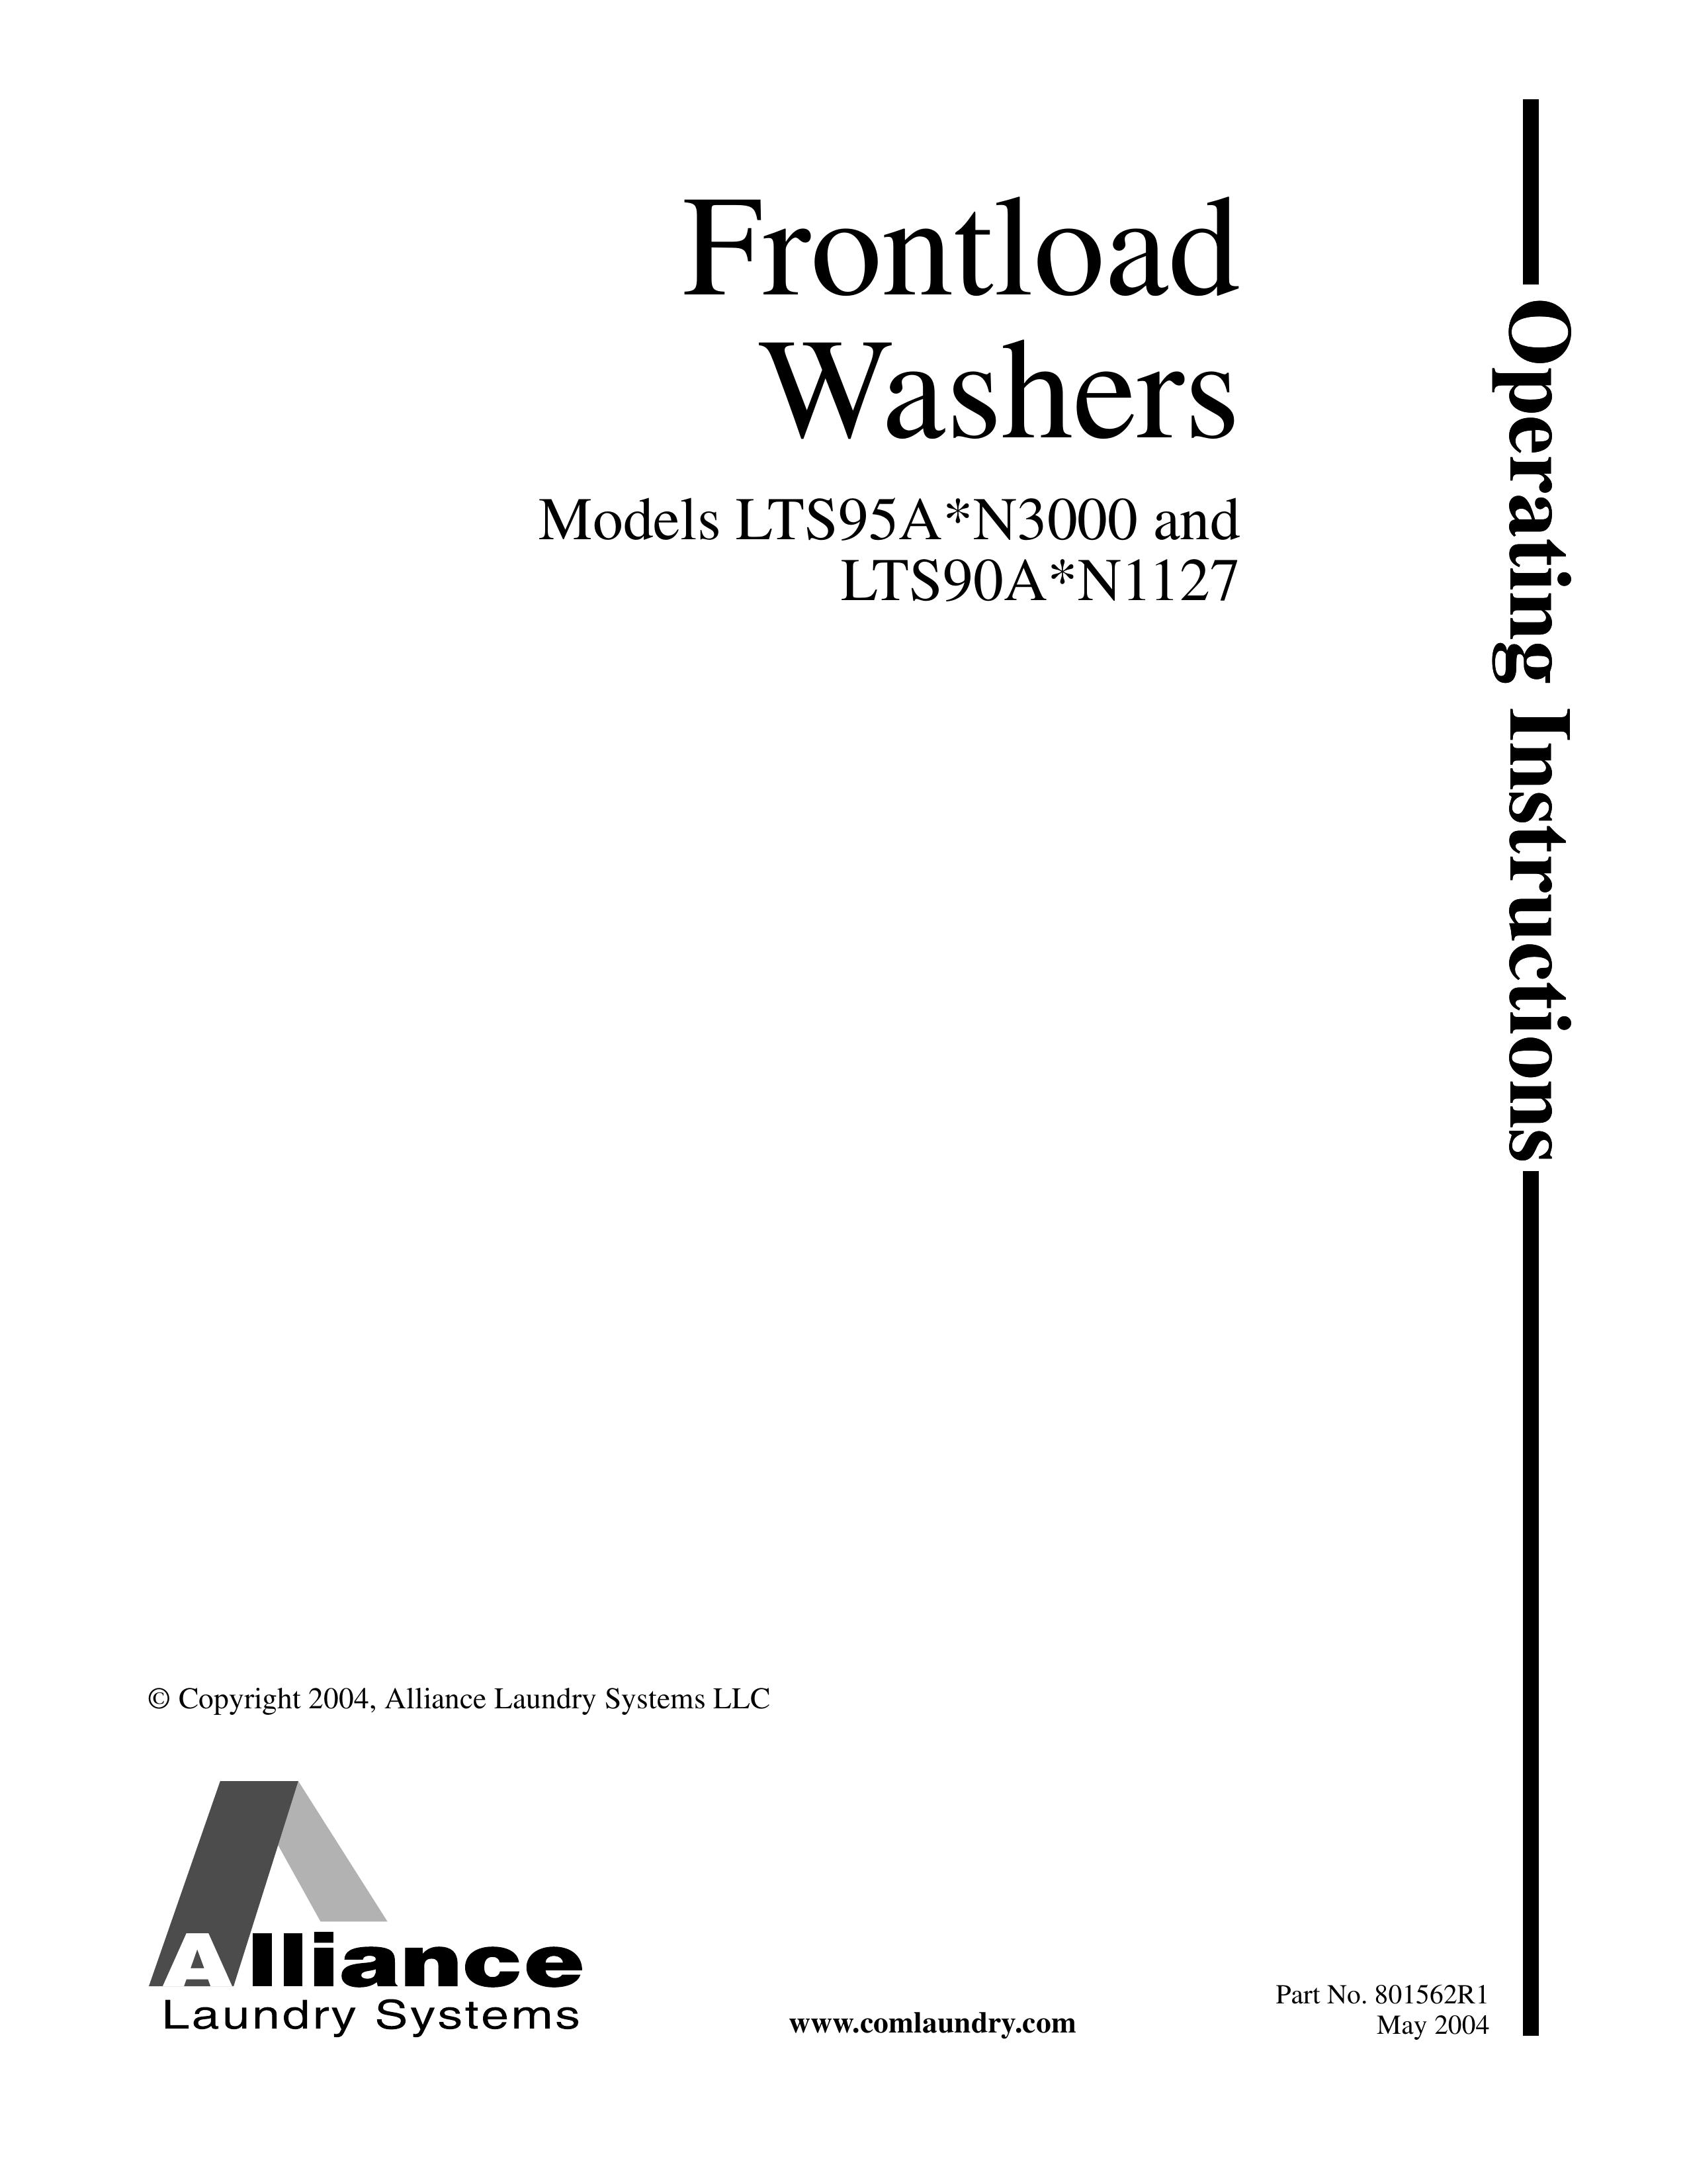 Speed Queen N1127 Washer User Manual